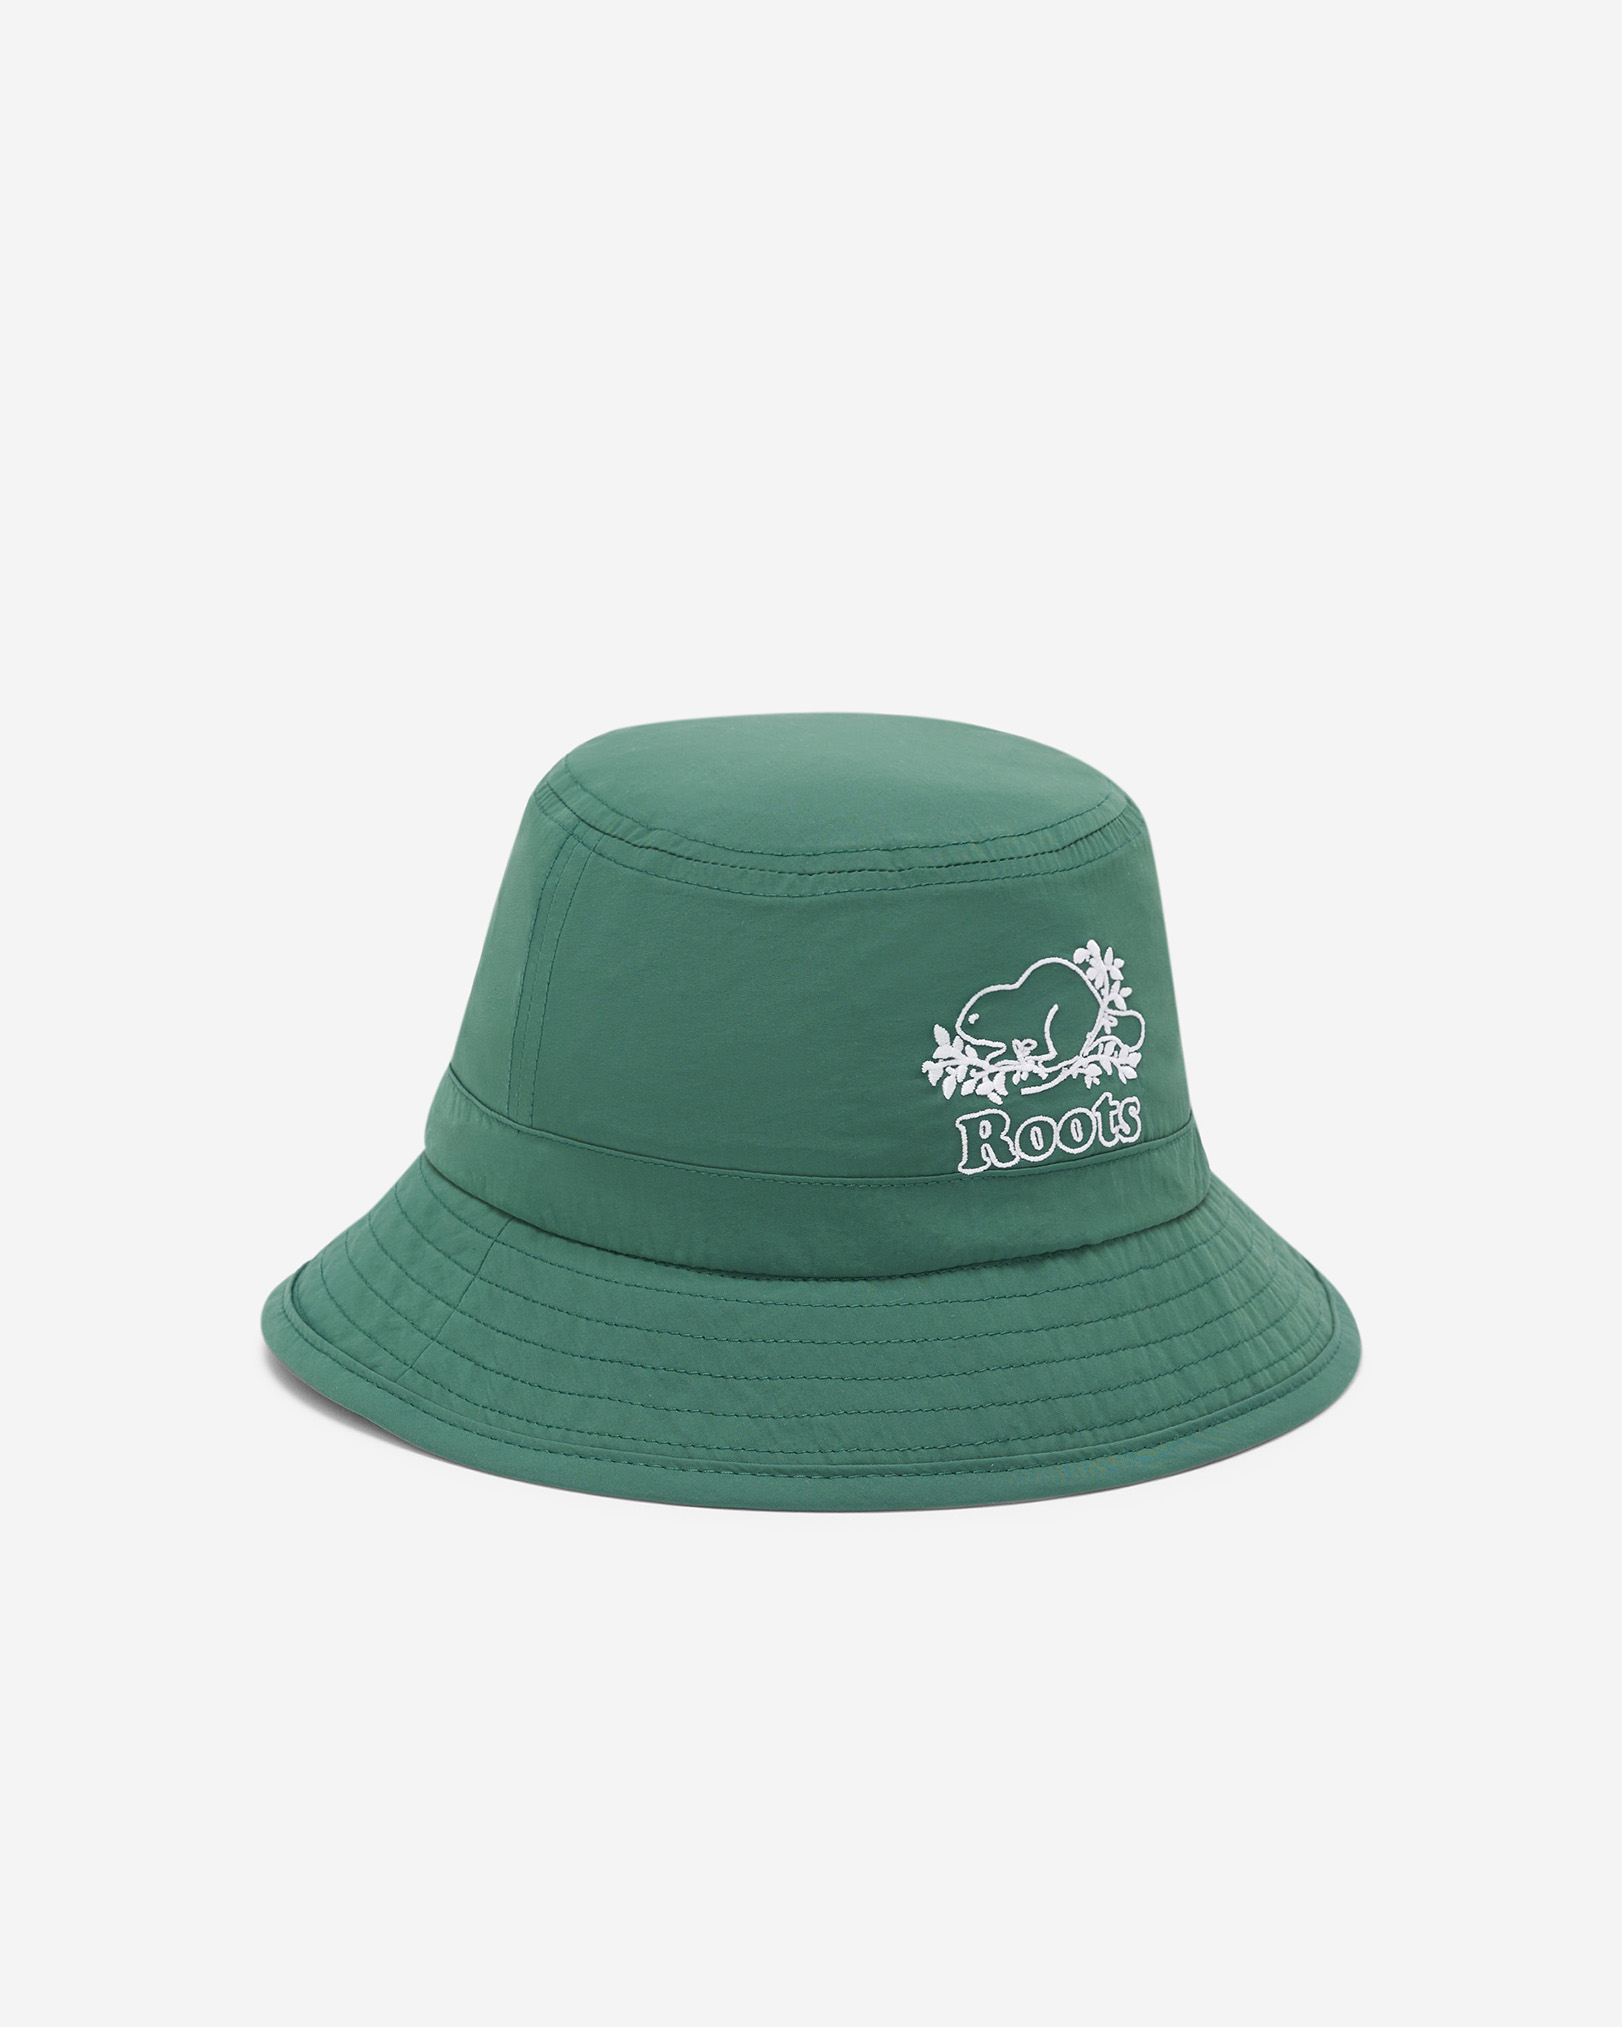 Roots Kids Cooper Nylon Bucket Hat in Forest Green